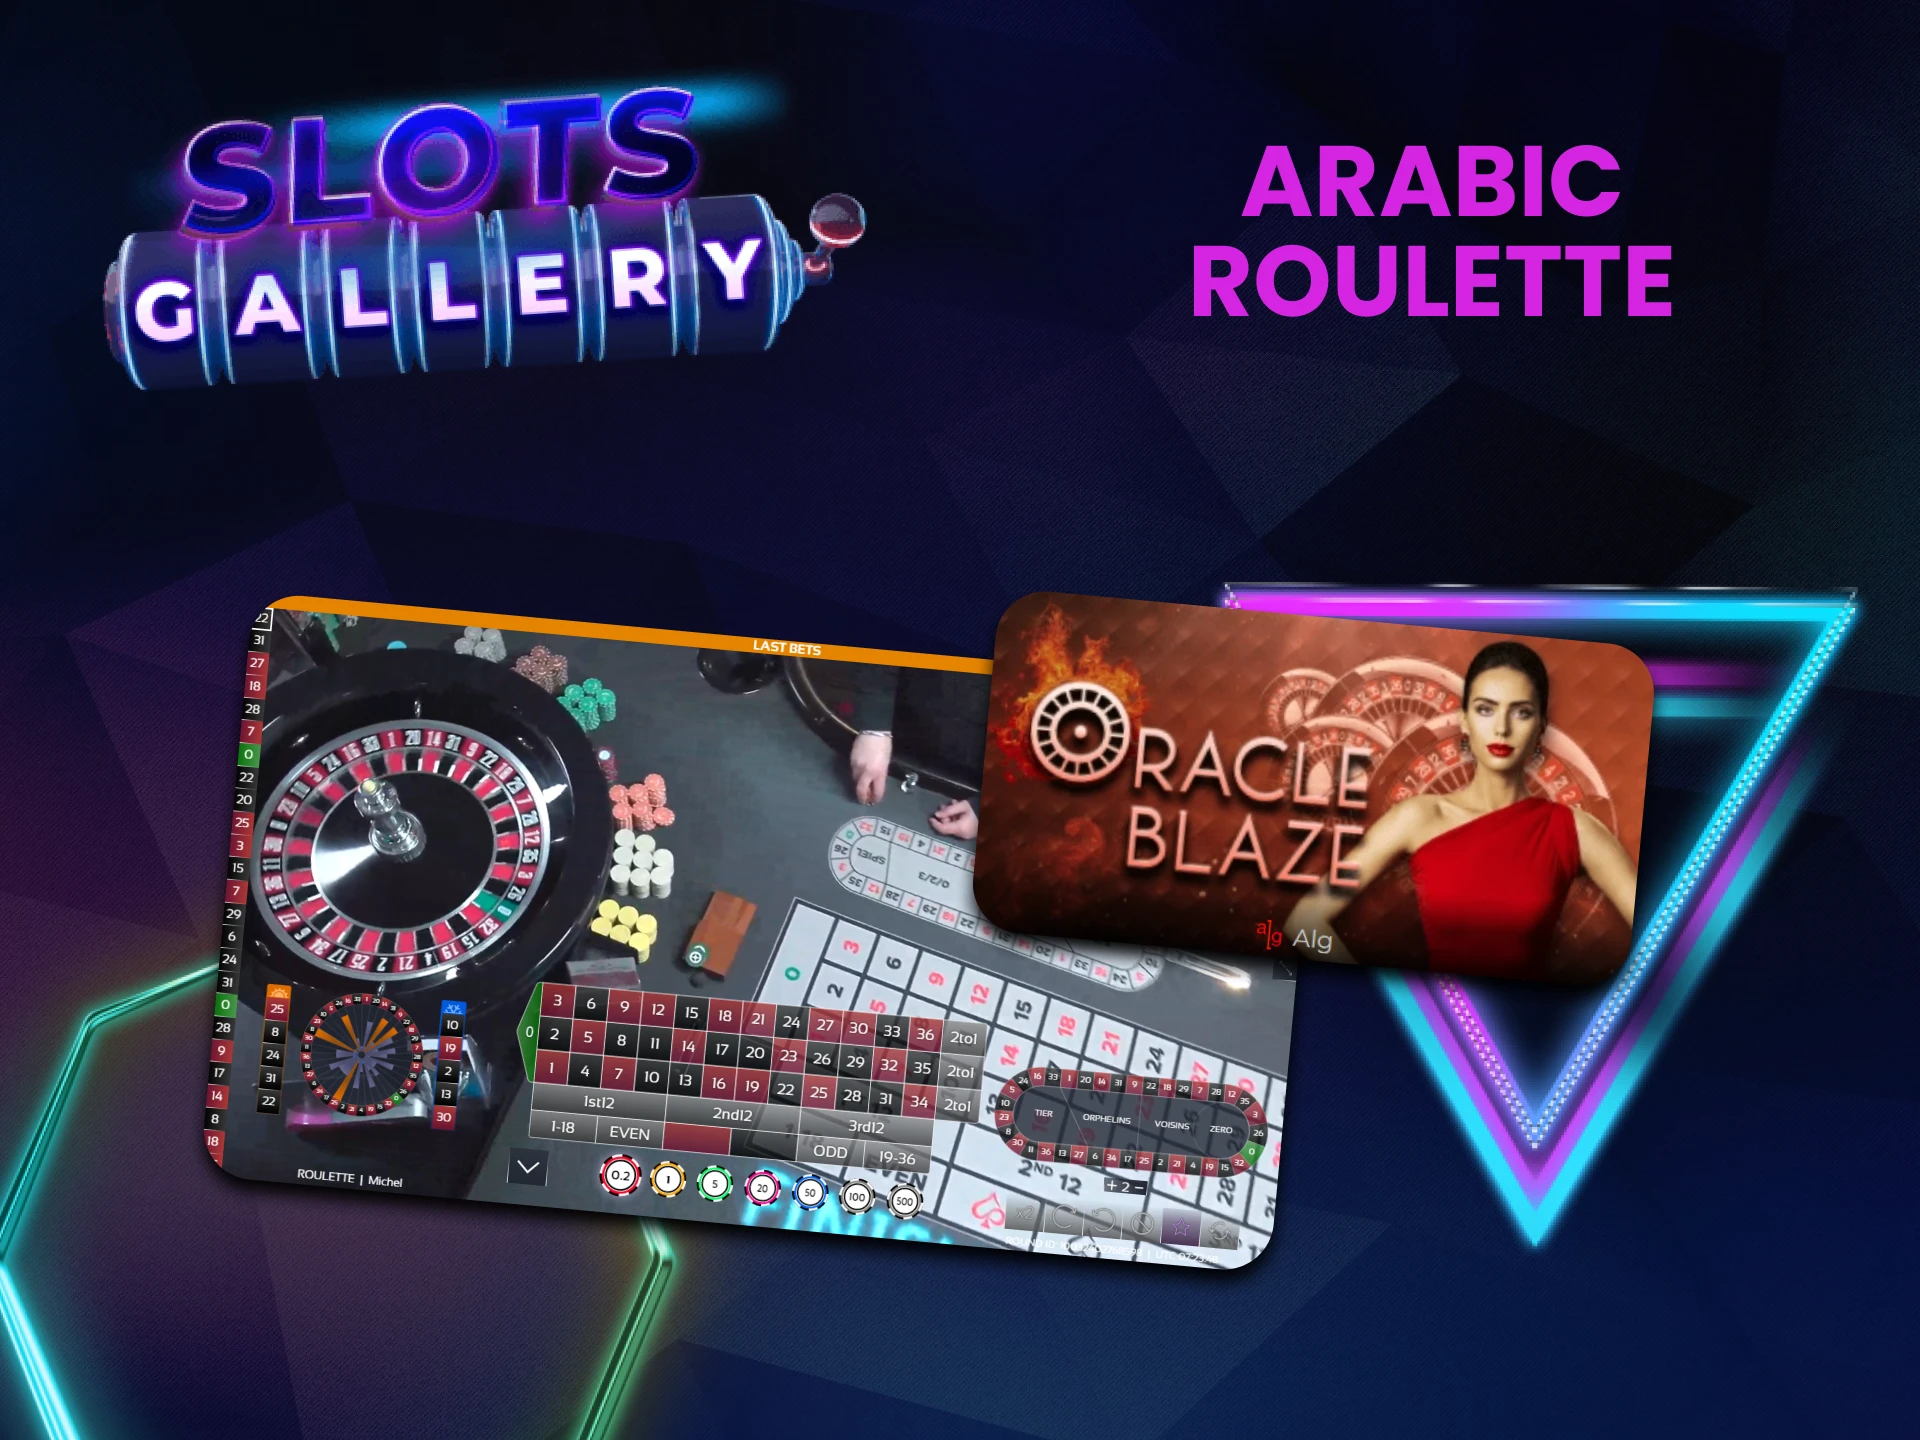 To play roulette at Slots Gallery, choose Arabic Roulette.